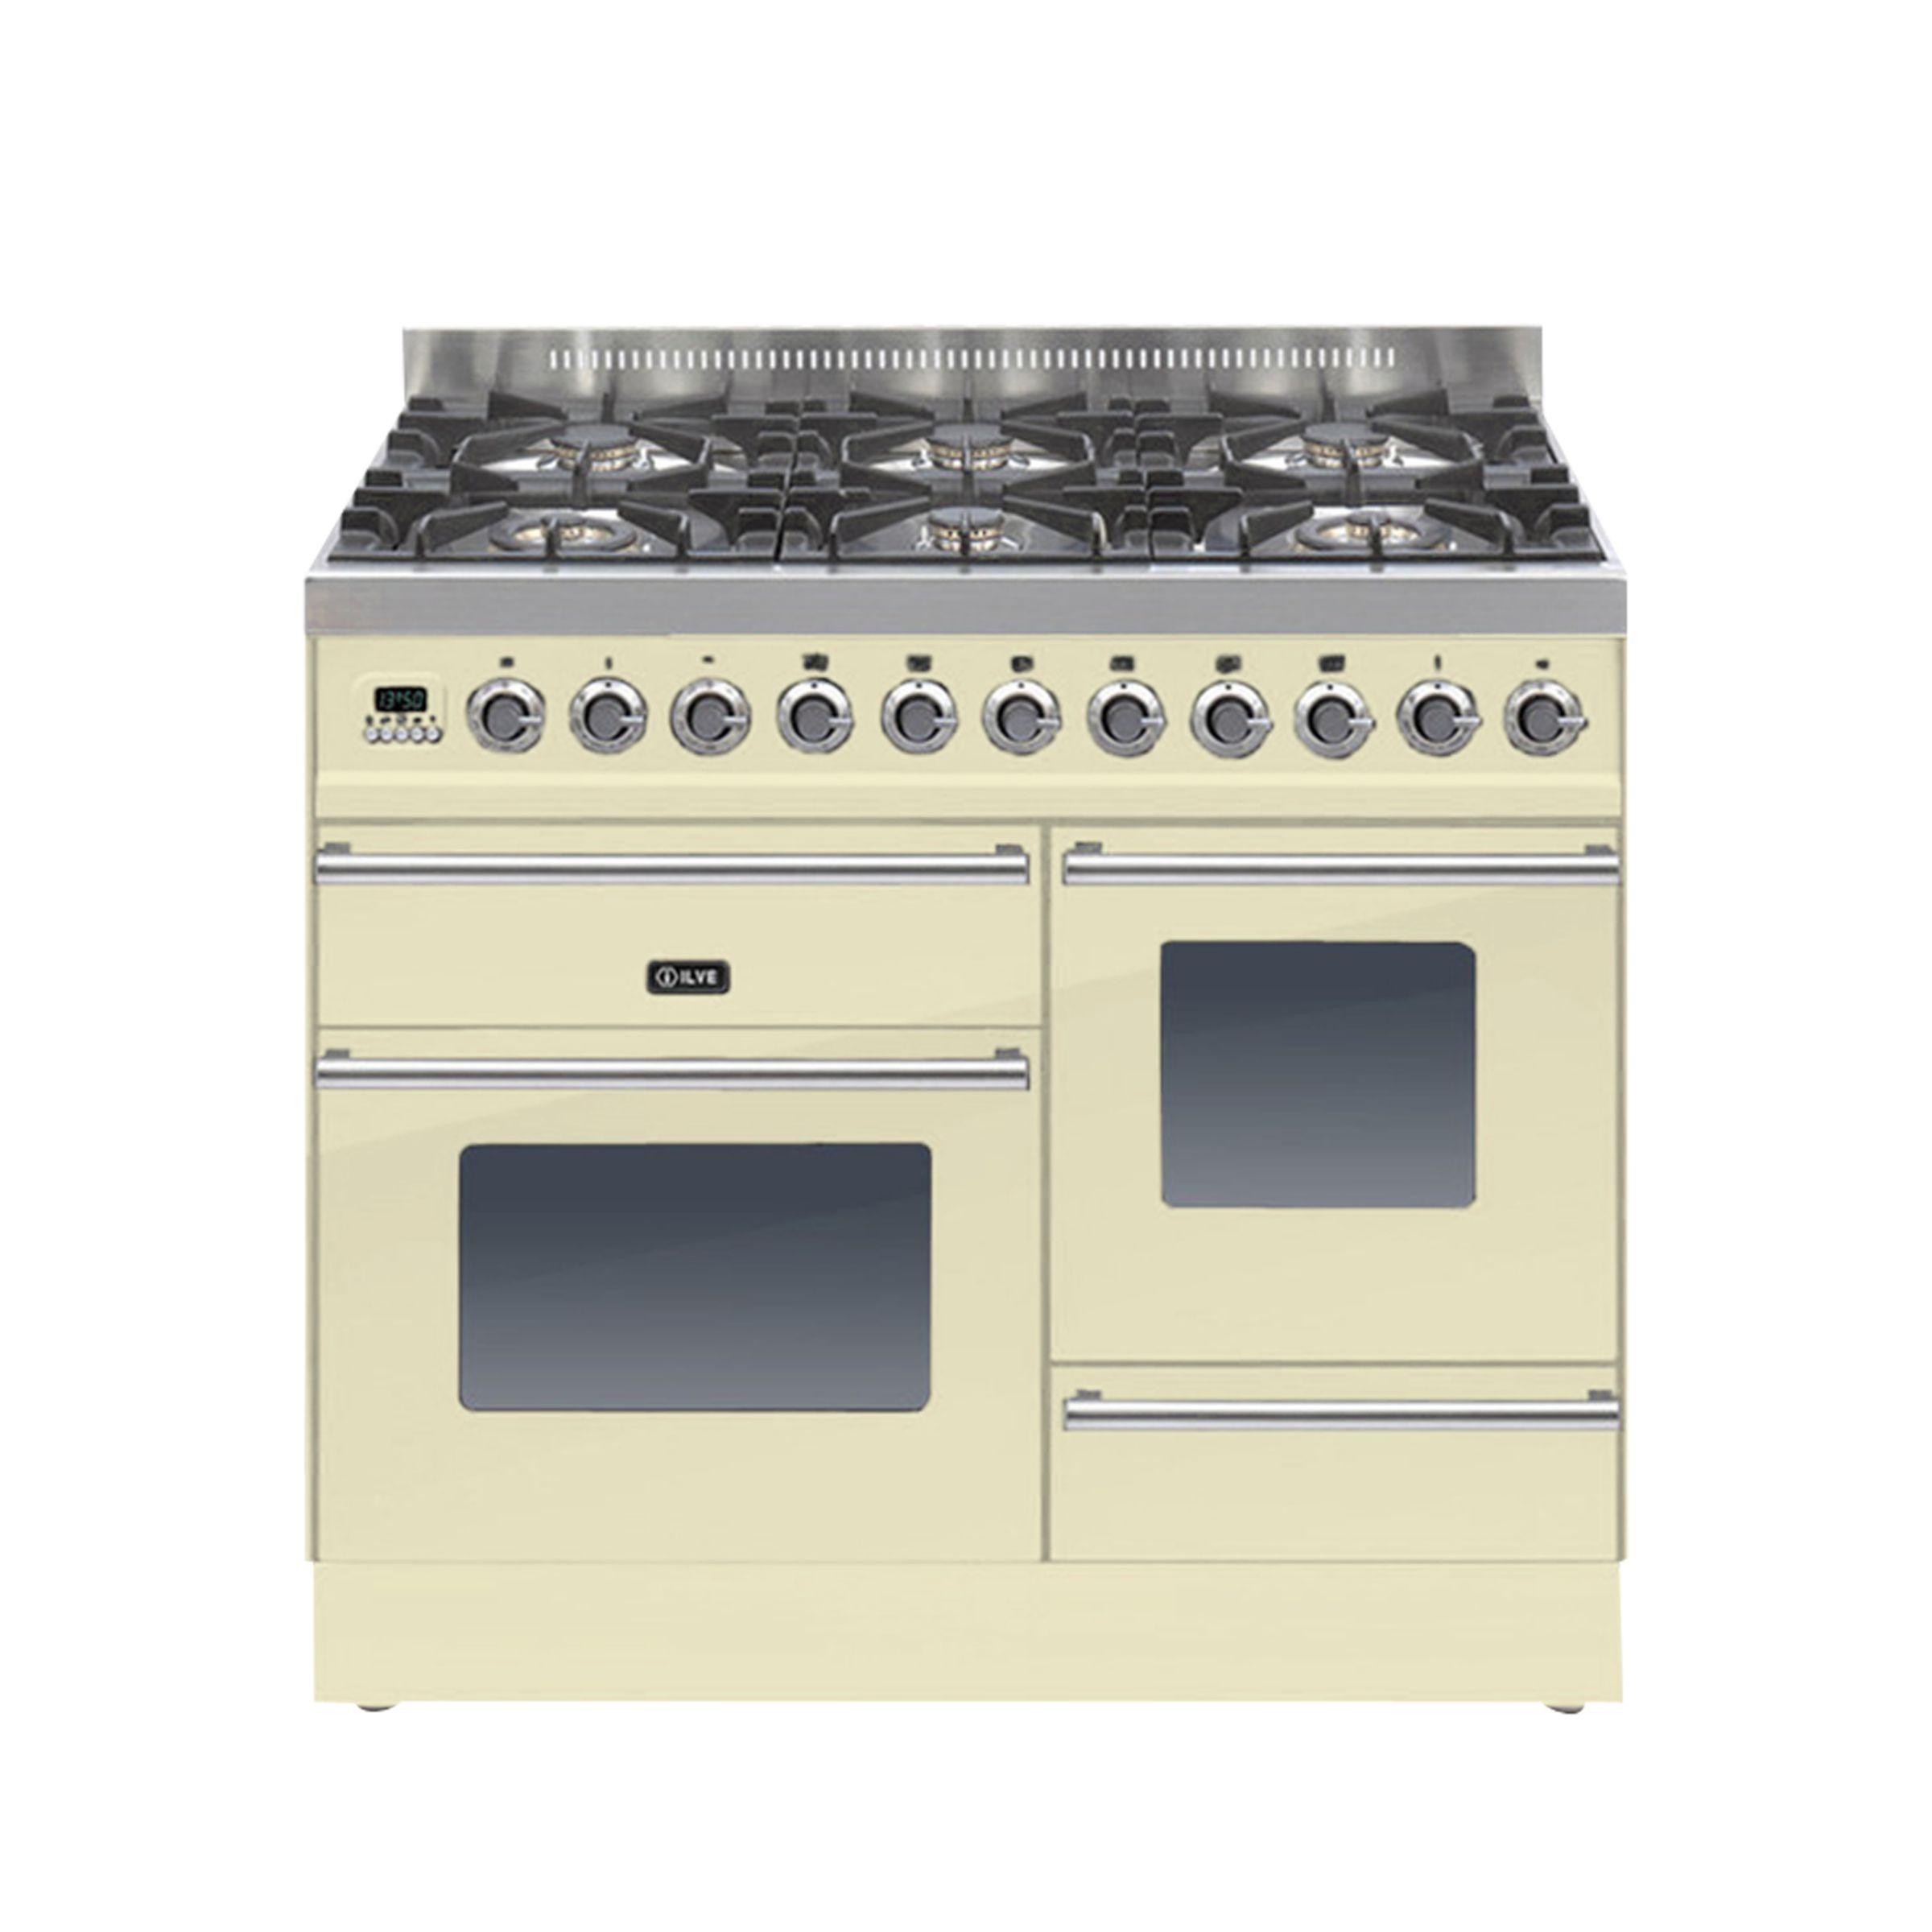 ILVE Roma PTW1006E3 Dual Fuel Freestanding Range Cooker